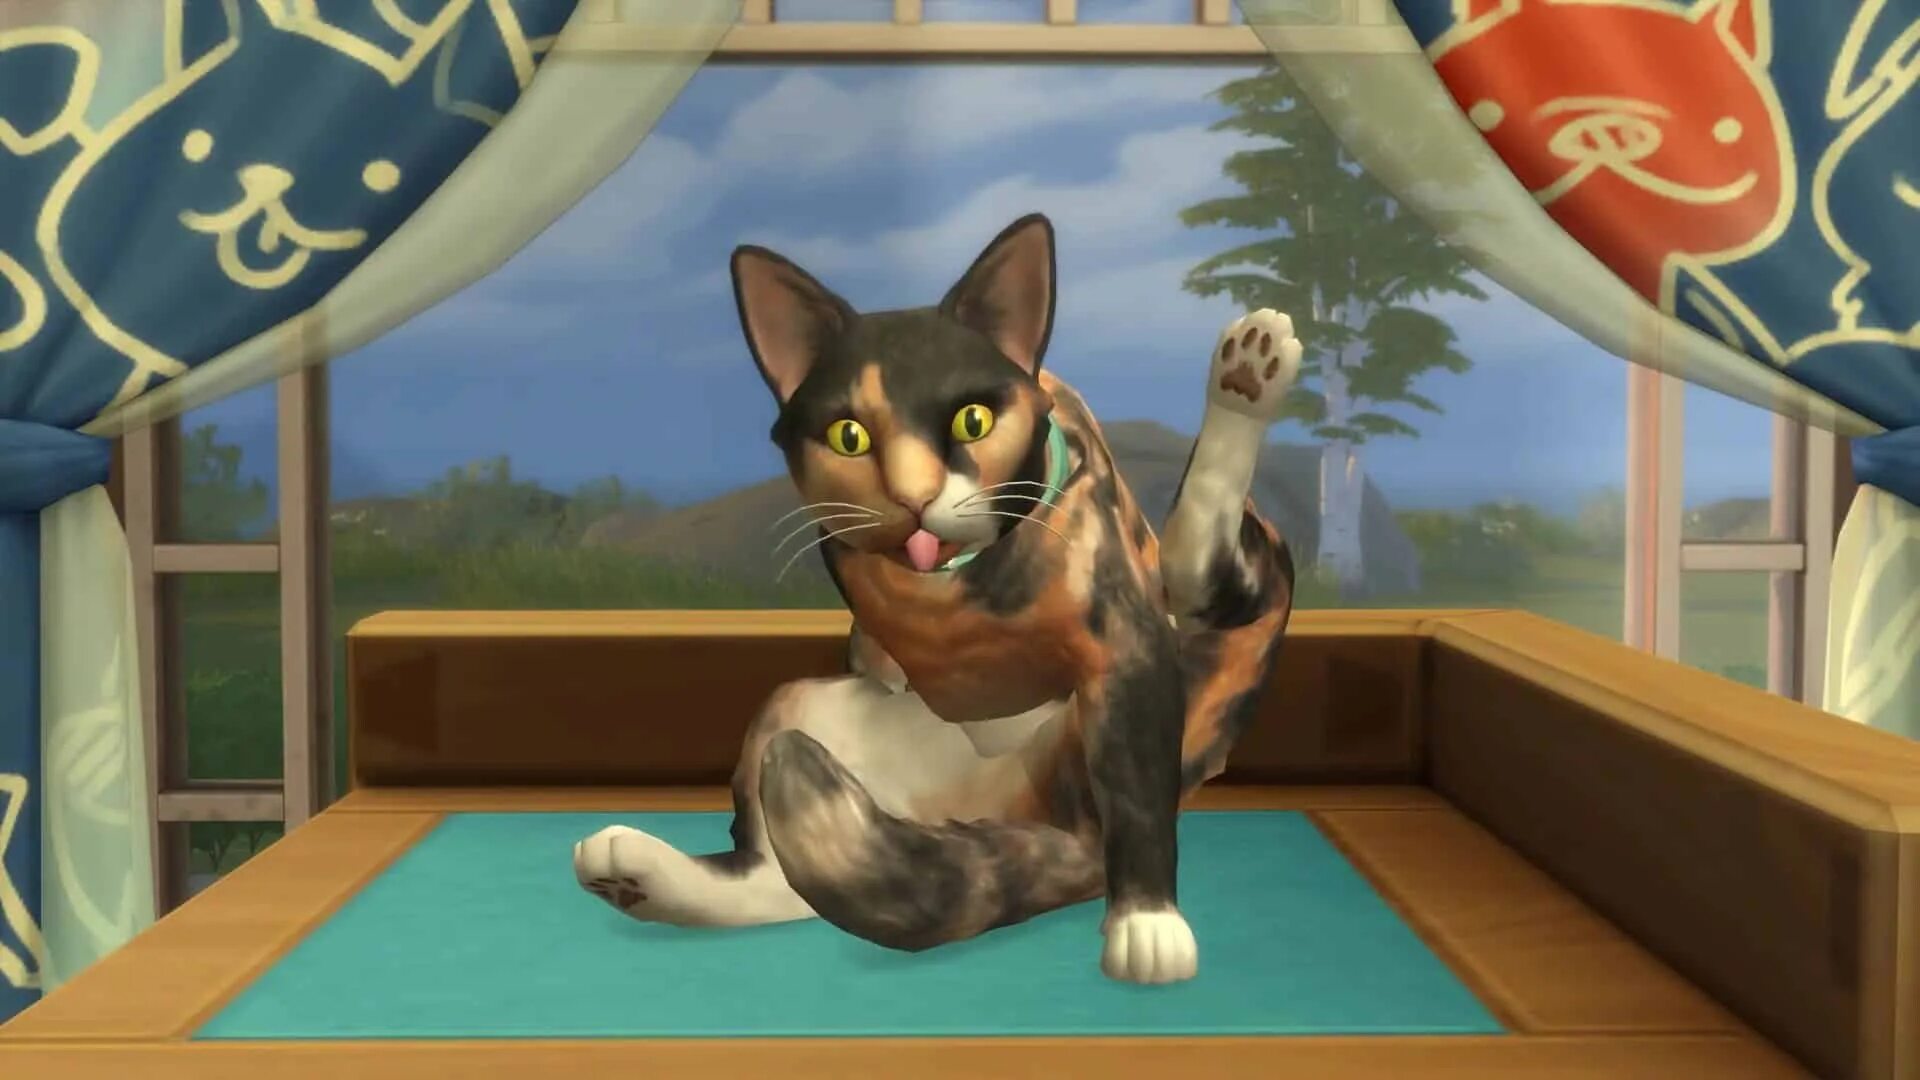 Wicked pets. Симс 4 питомцы кошки. Симс 4 Wicked Pets. Кошечка the SIMS 4. SIMS 4 мод Wicked Pets.